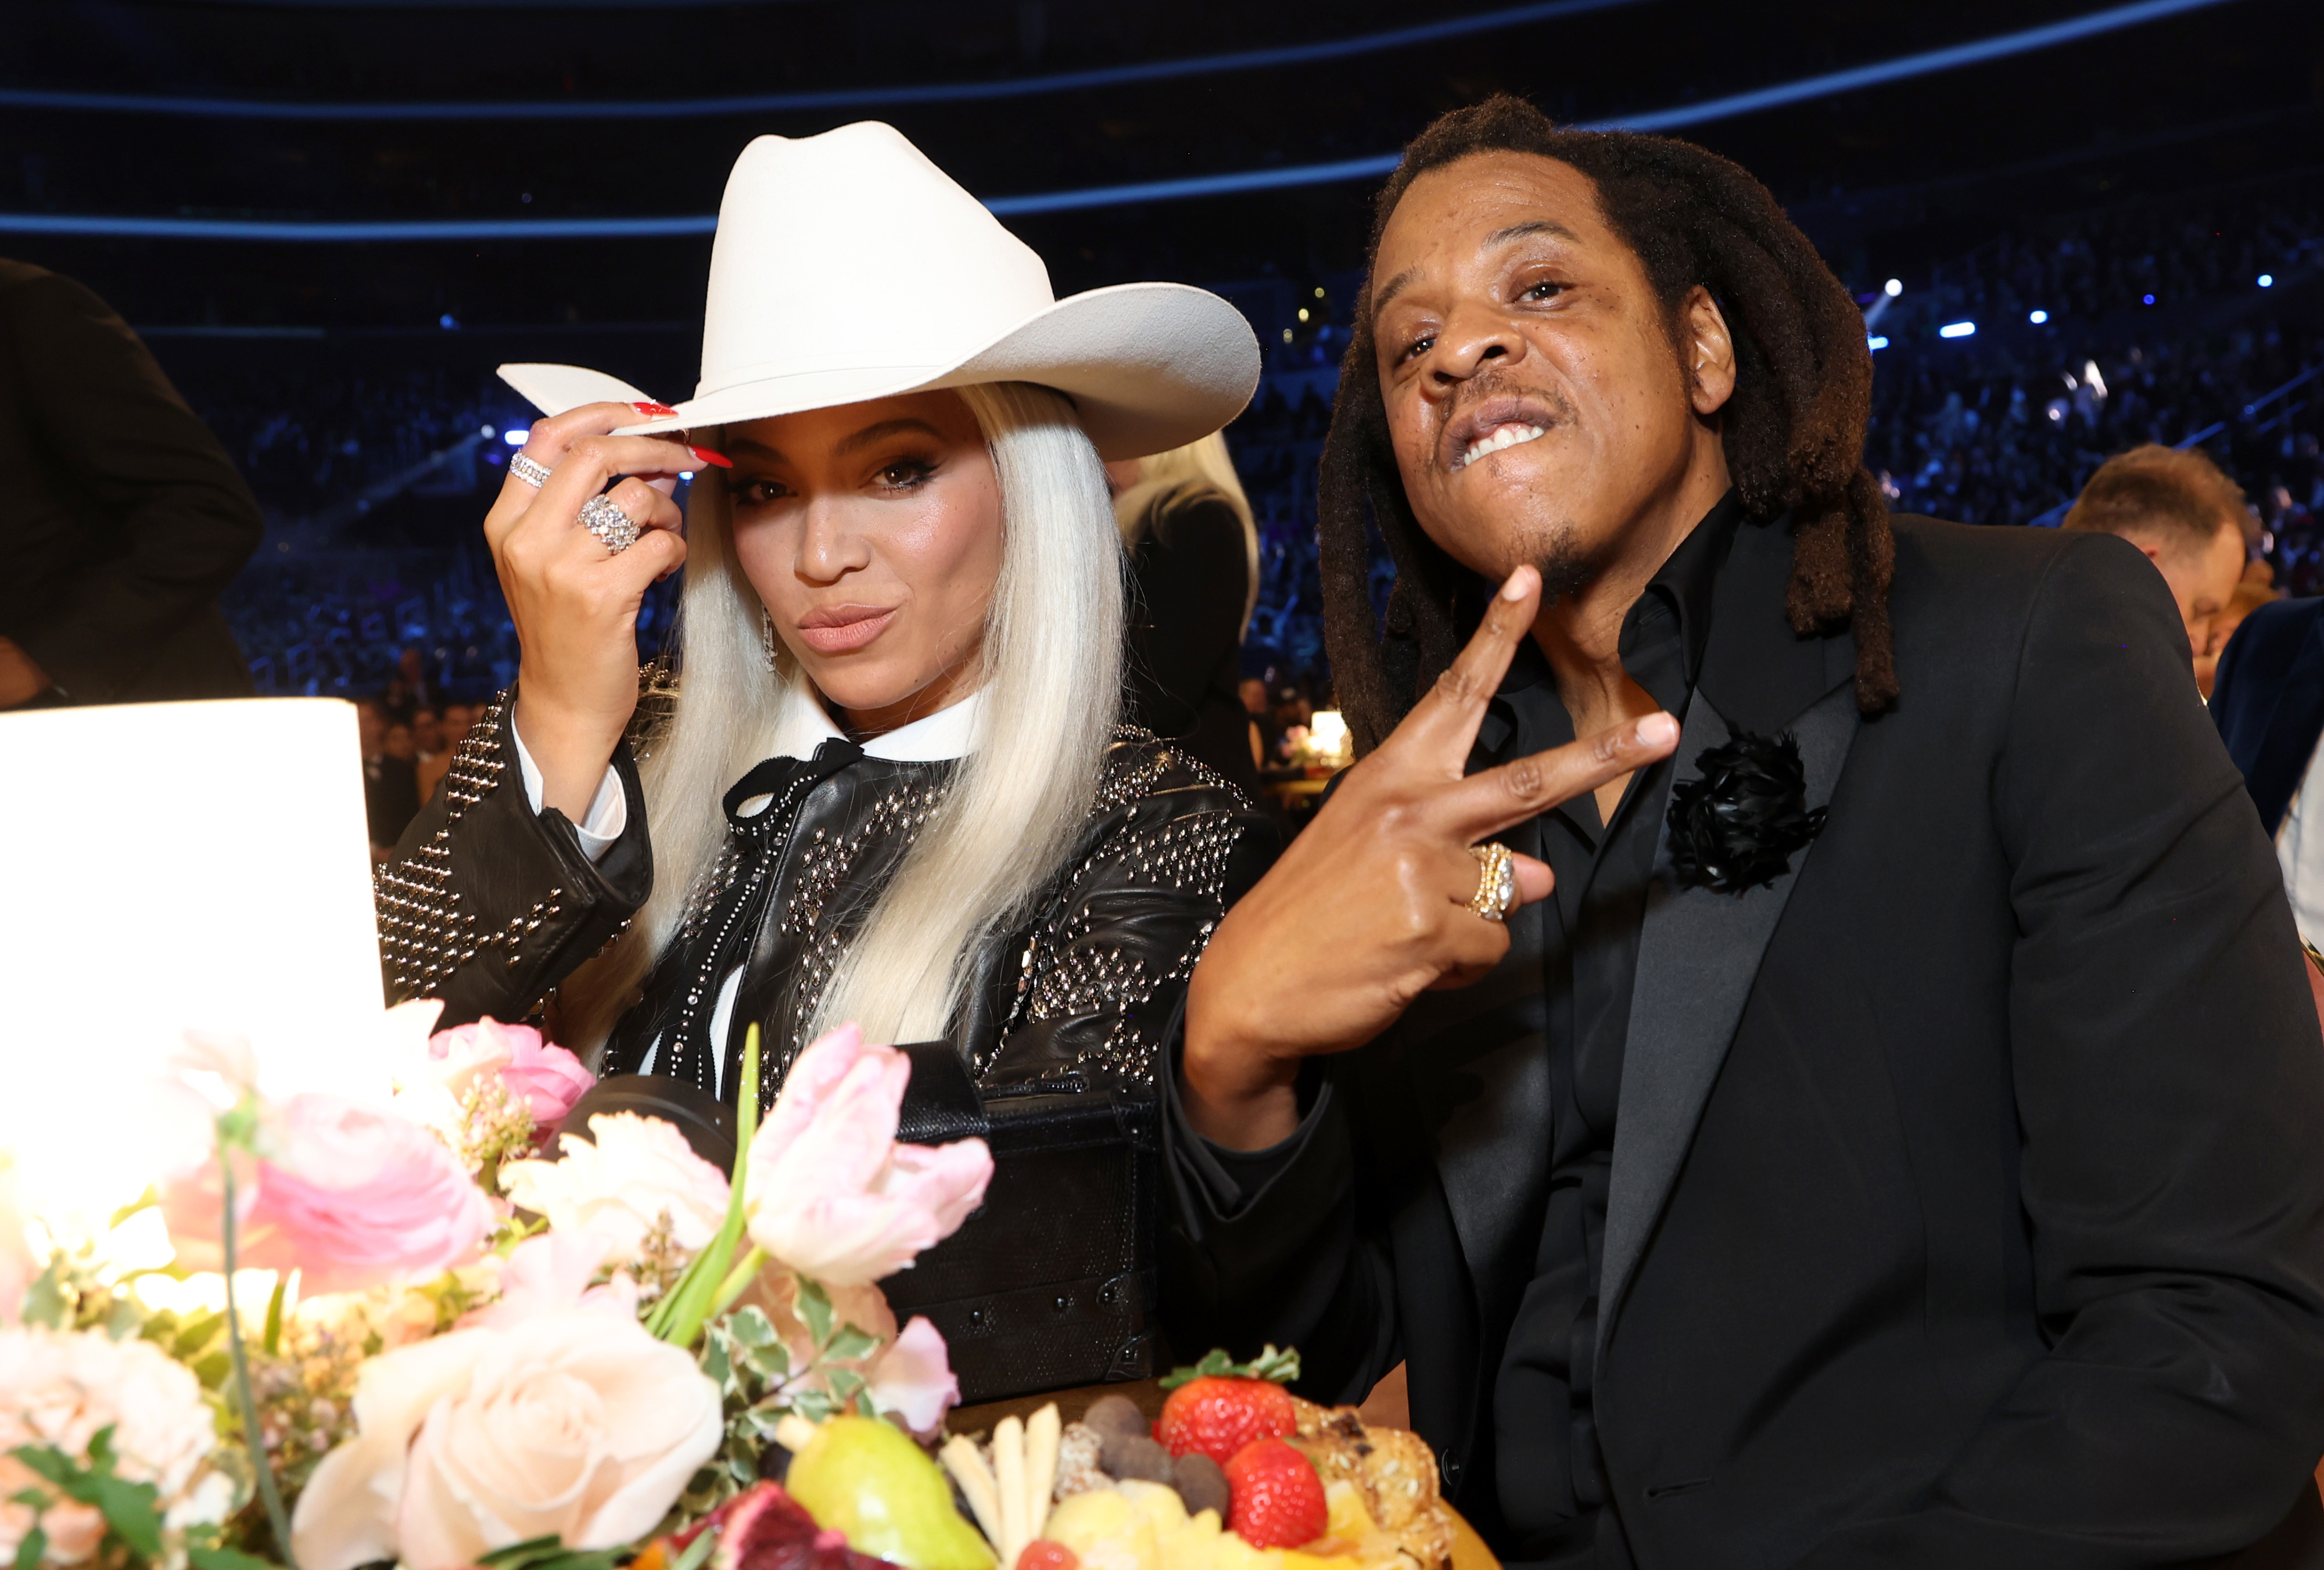 Beyoncé and Jay-Z seated at a table with floral arrangement, she wearing a large cowboy hat and he making a peace sign